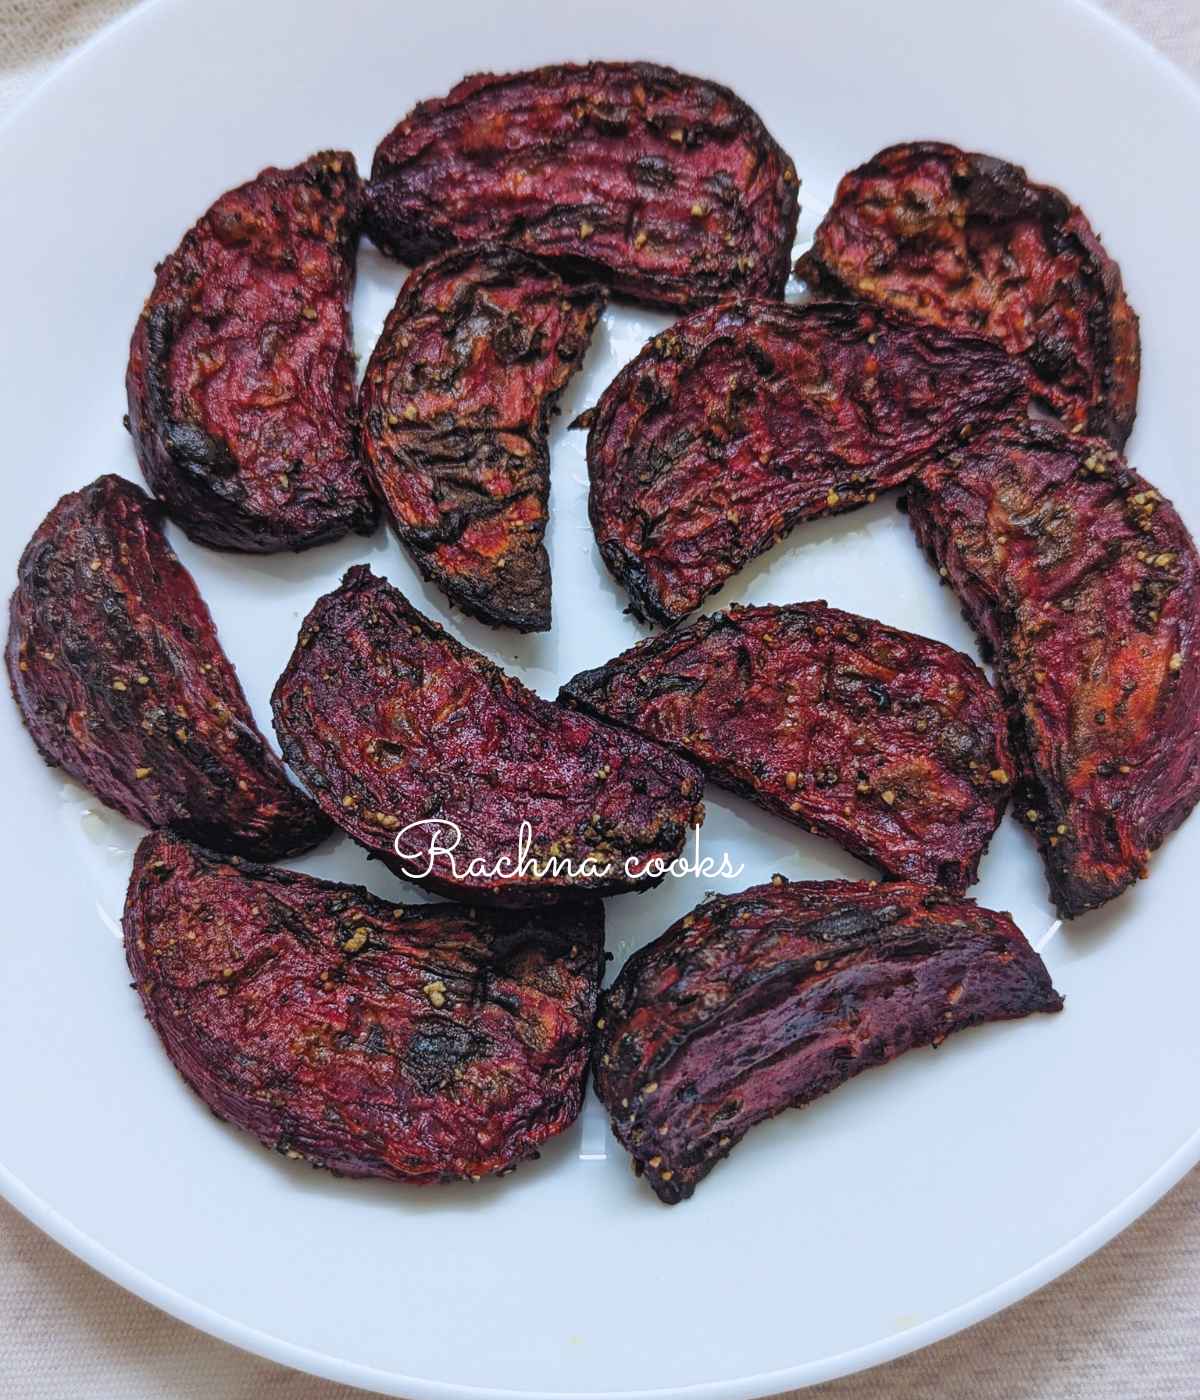 Roasted beets served on a white plate